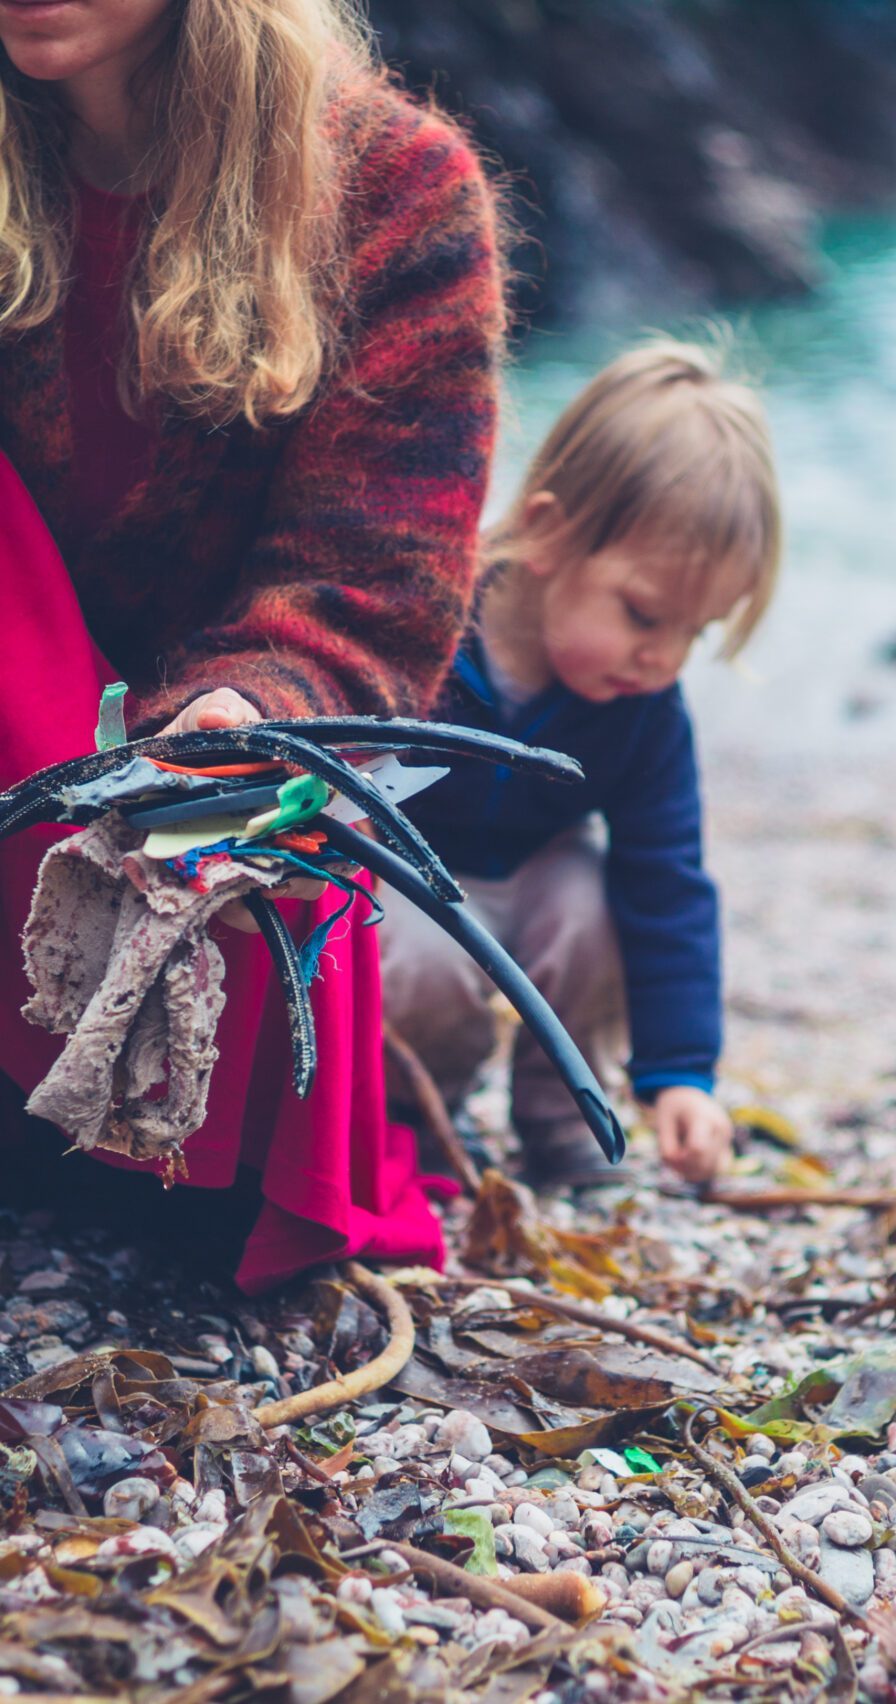 A little toddler is helping his mother clean up plastic rubbish on the beach